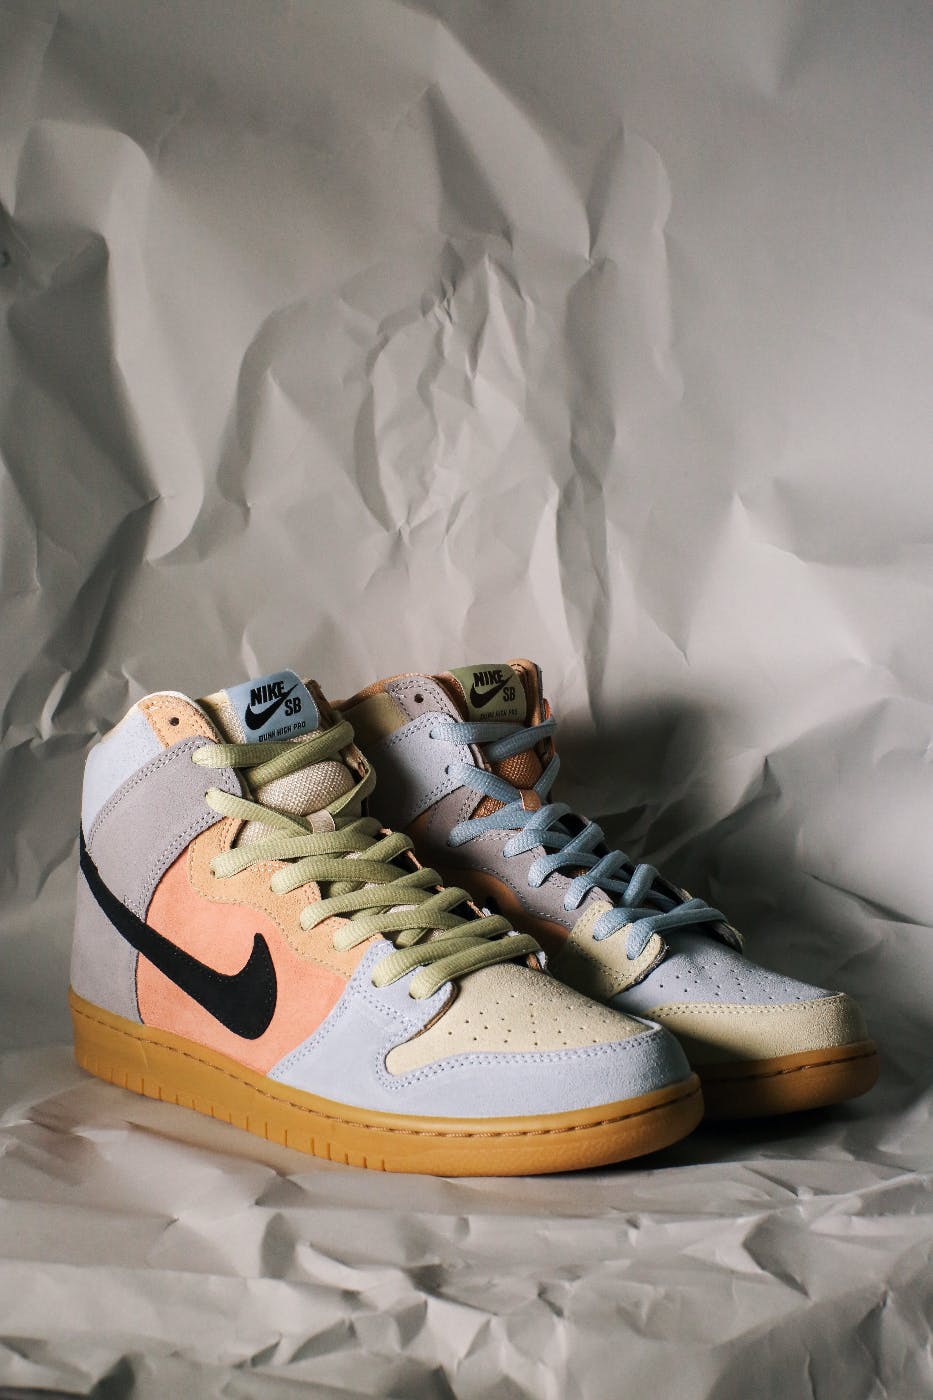 a pair of high top Nike sneakers in cream, grey and salmon with yellow laces and a black swoosh